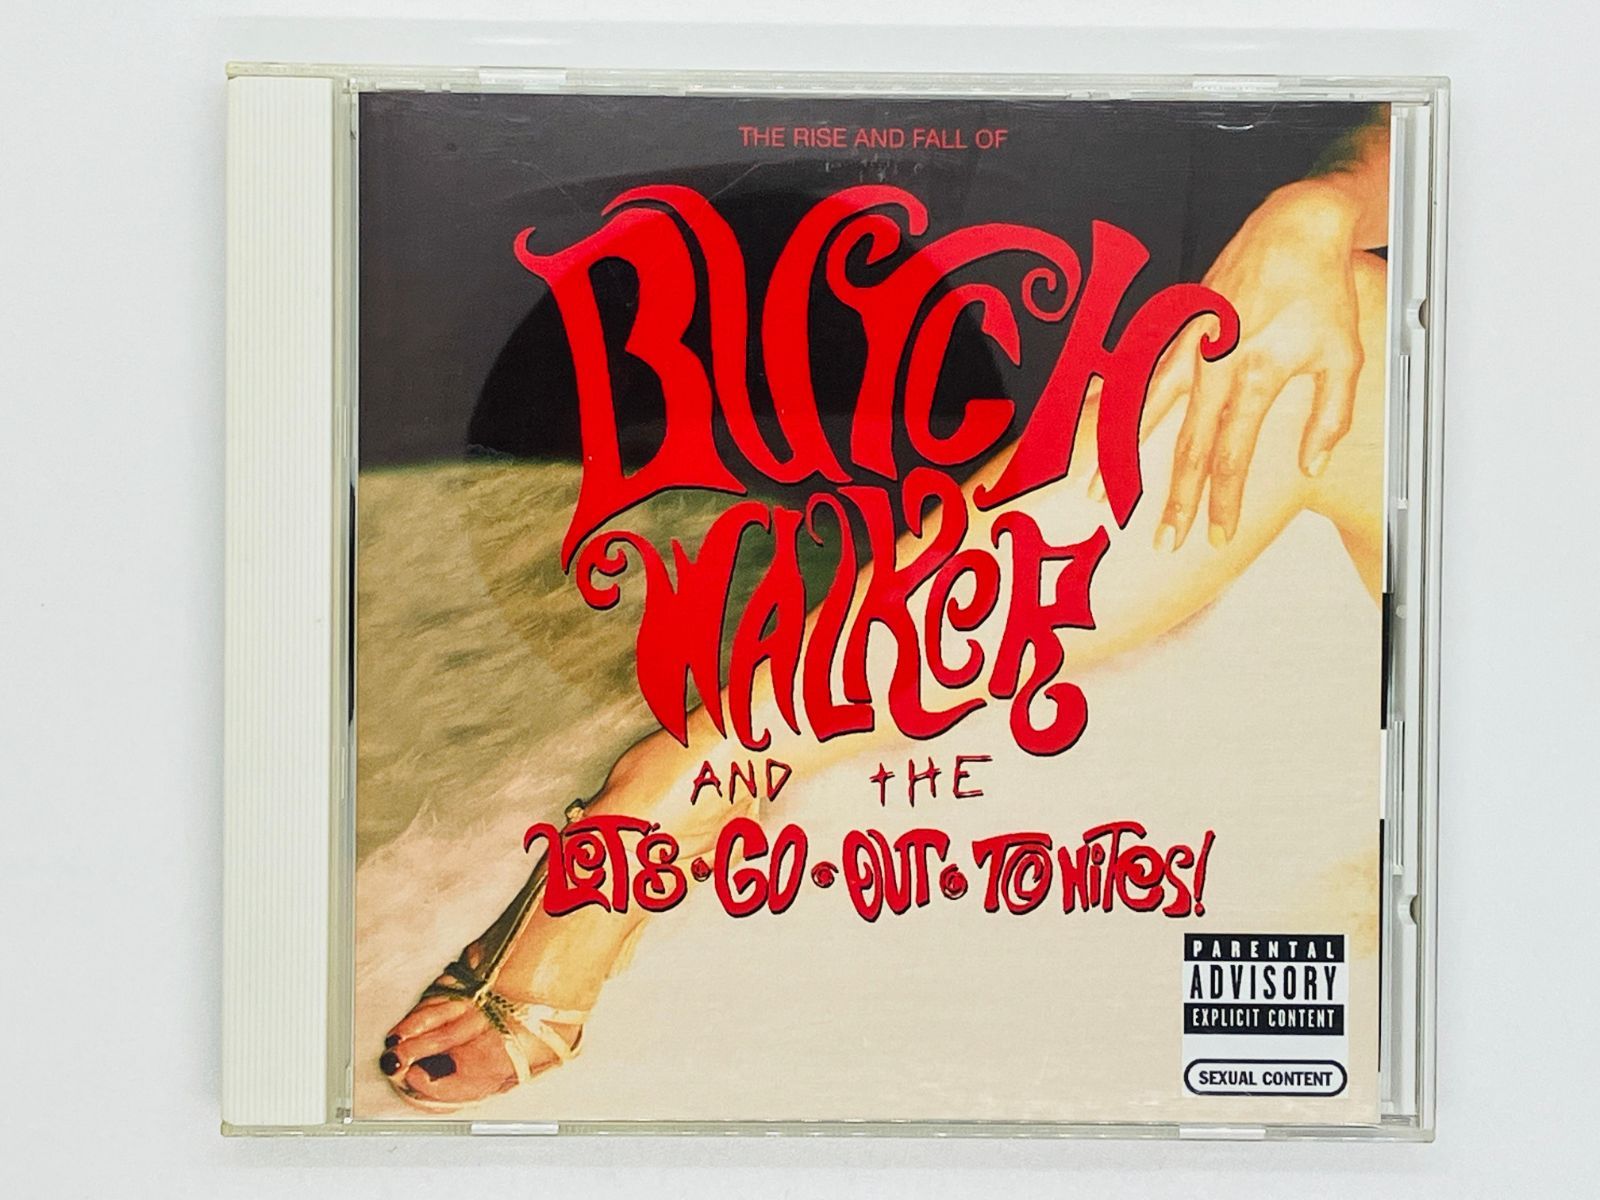 CD The Rise And Fall Of / BUTCH WALKER AND THE LET'S GO OUT TONITES / ブッチ・ ウォーカー EICP-649 Z58 - メルカリ